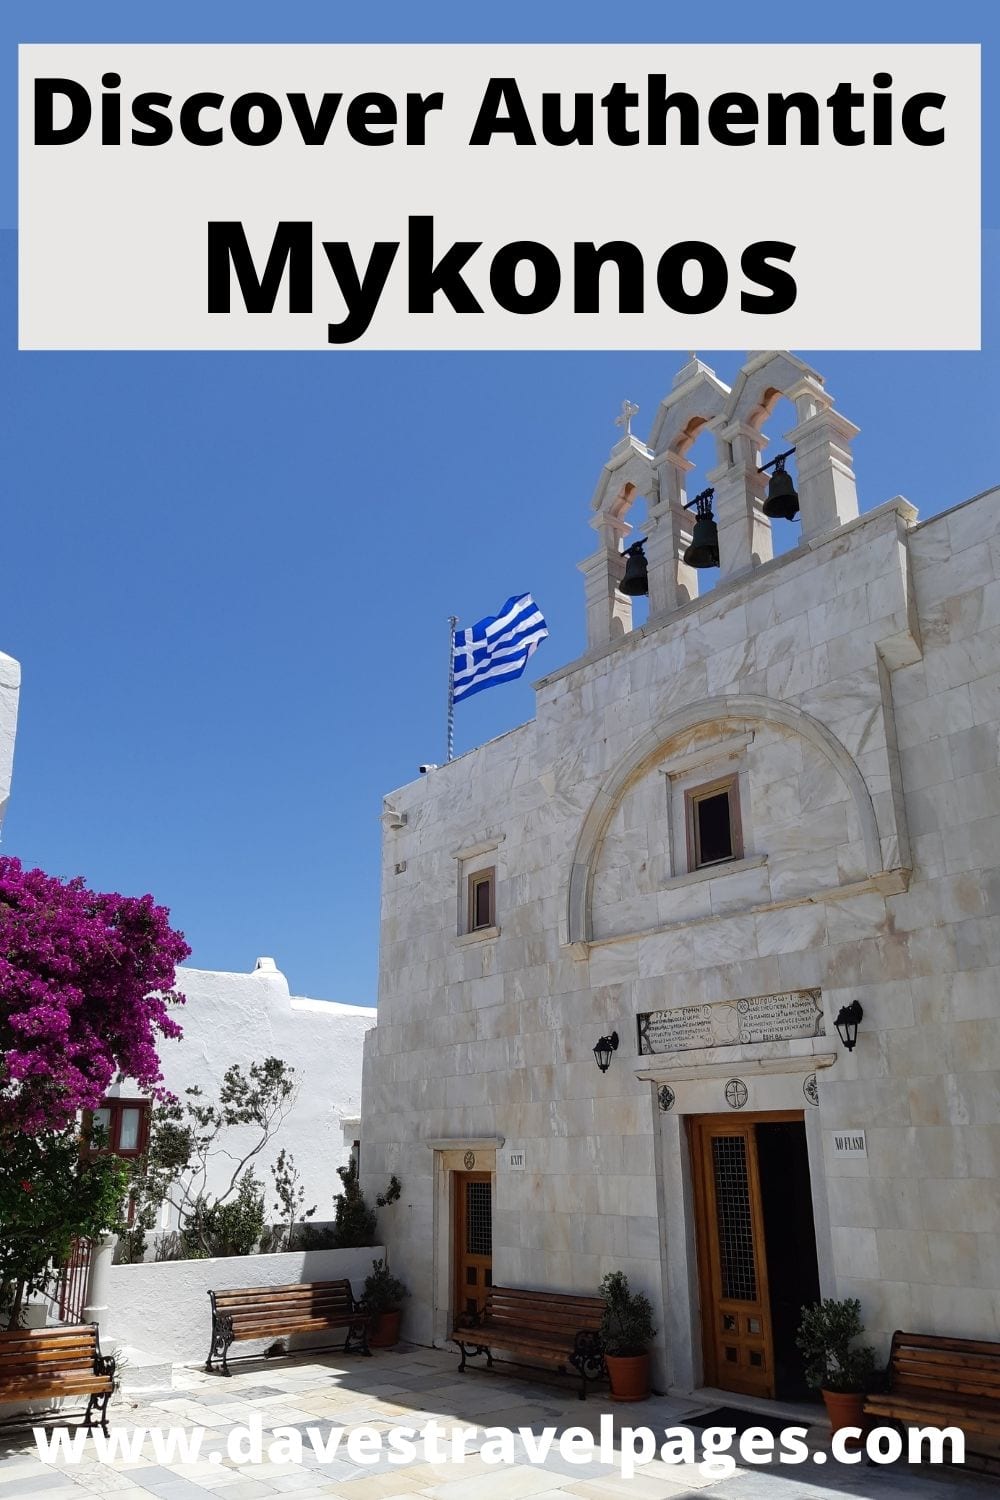 Discover authentic Mykonos in the Cyclades of Greece